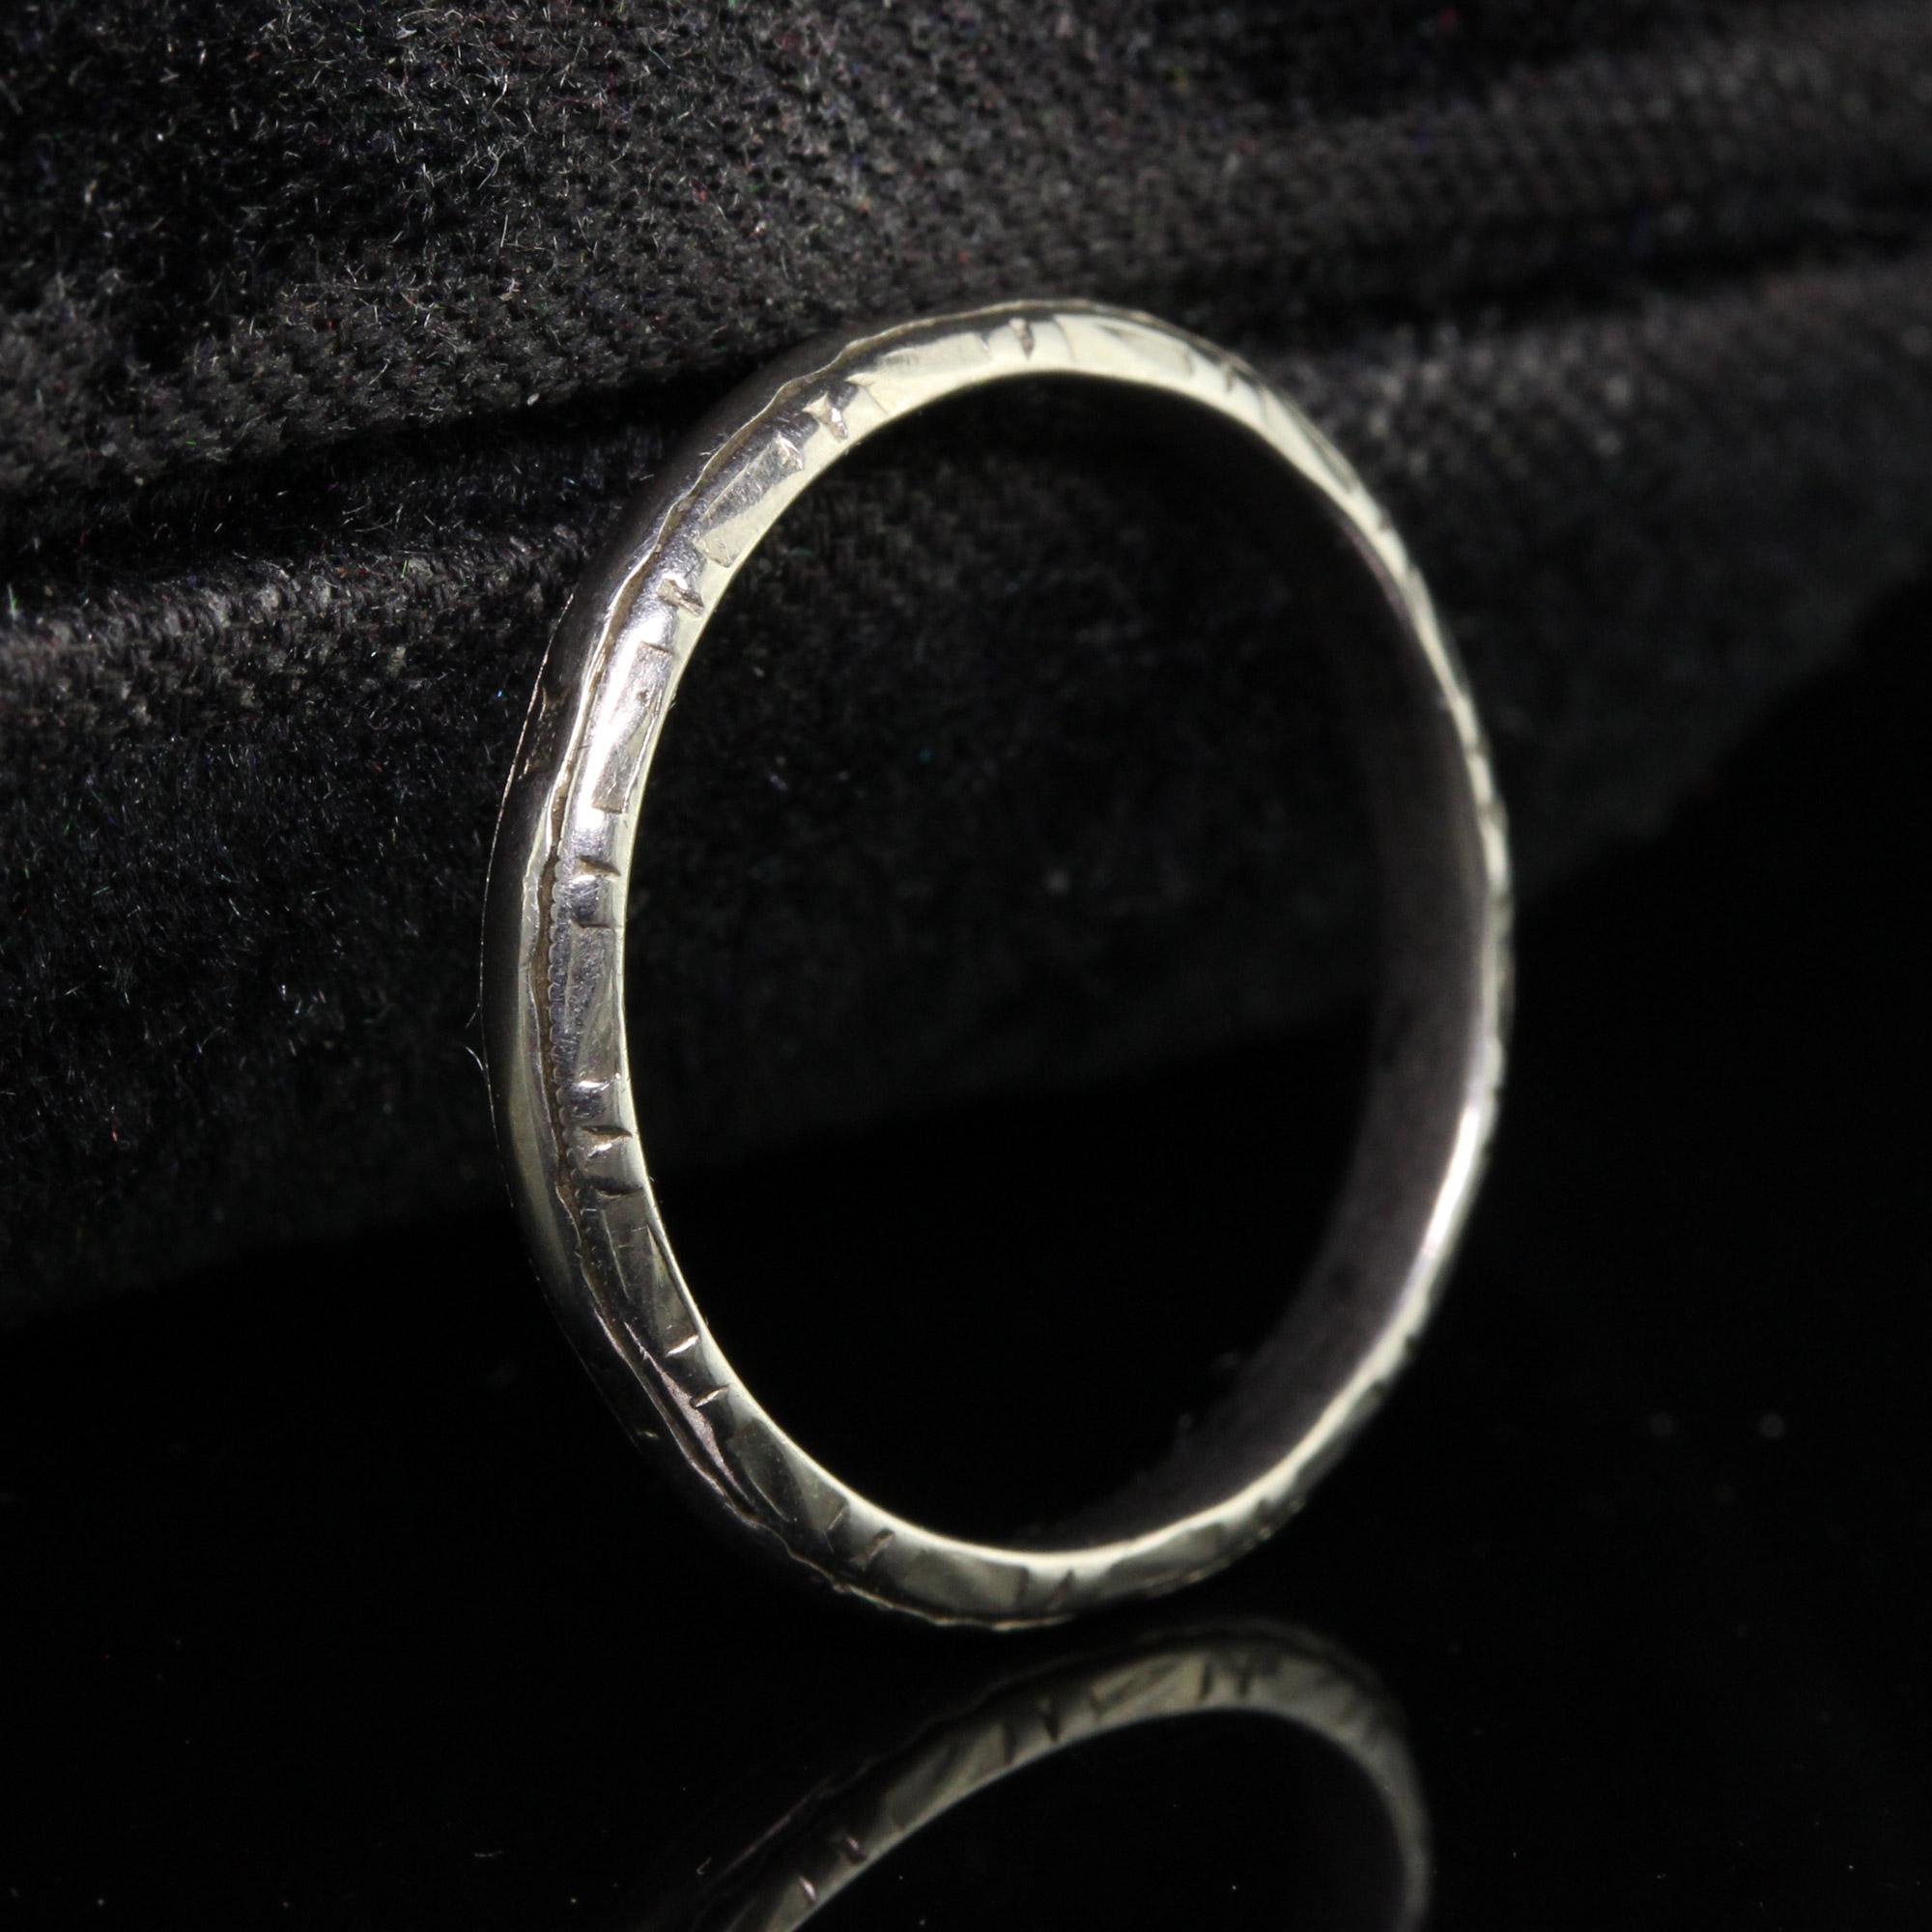 Antique Art Deco 18K White Gold Classic Engraved Wedding Band - Size 6 In Good Condition For Sale In Great Neck, NY